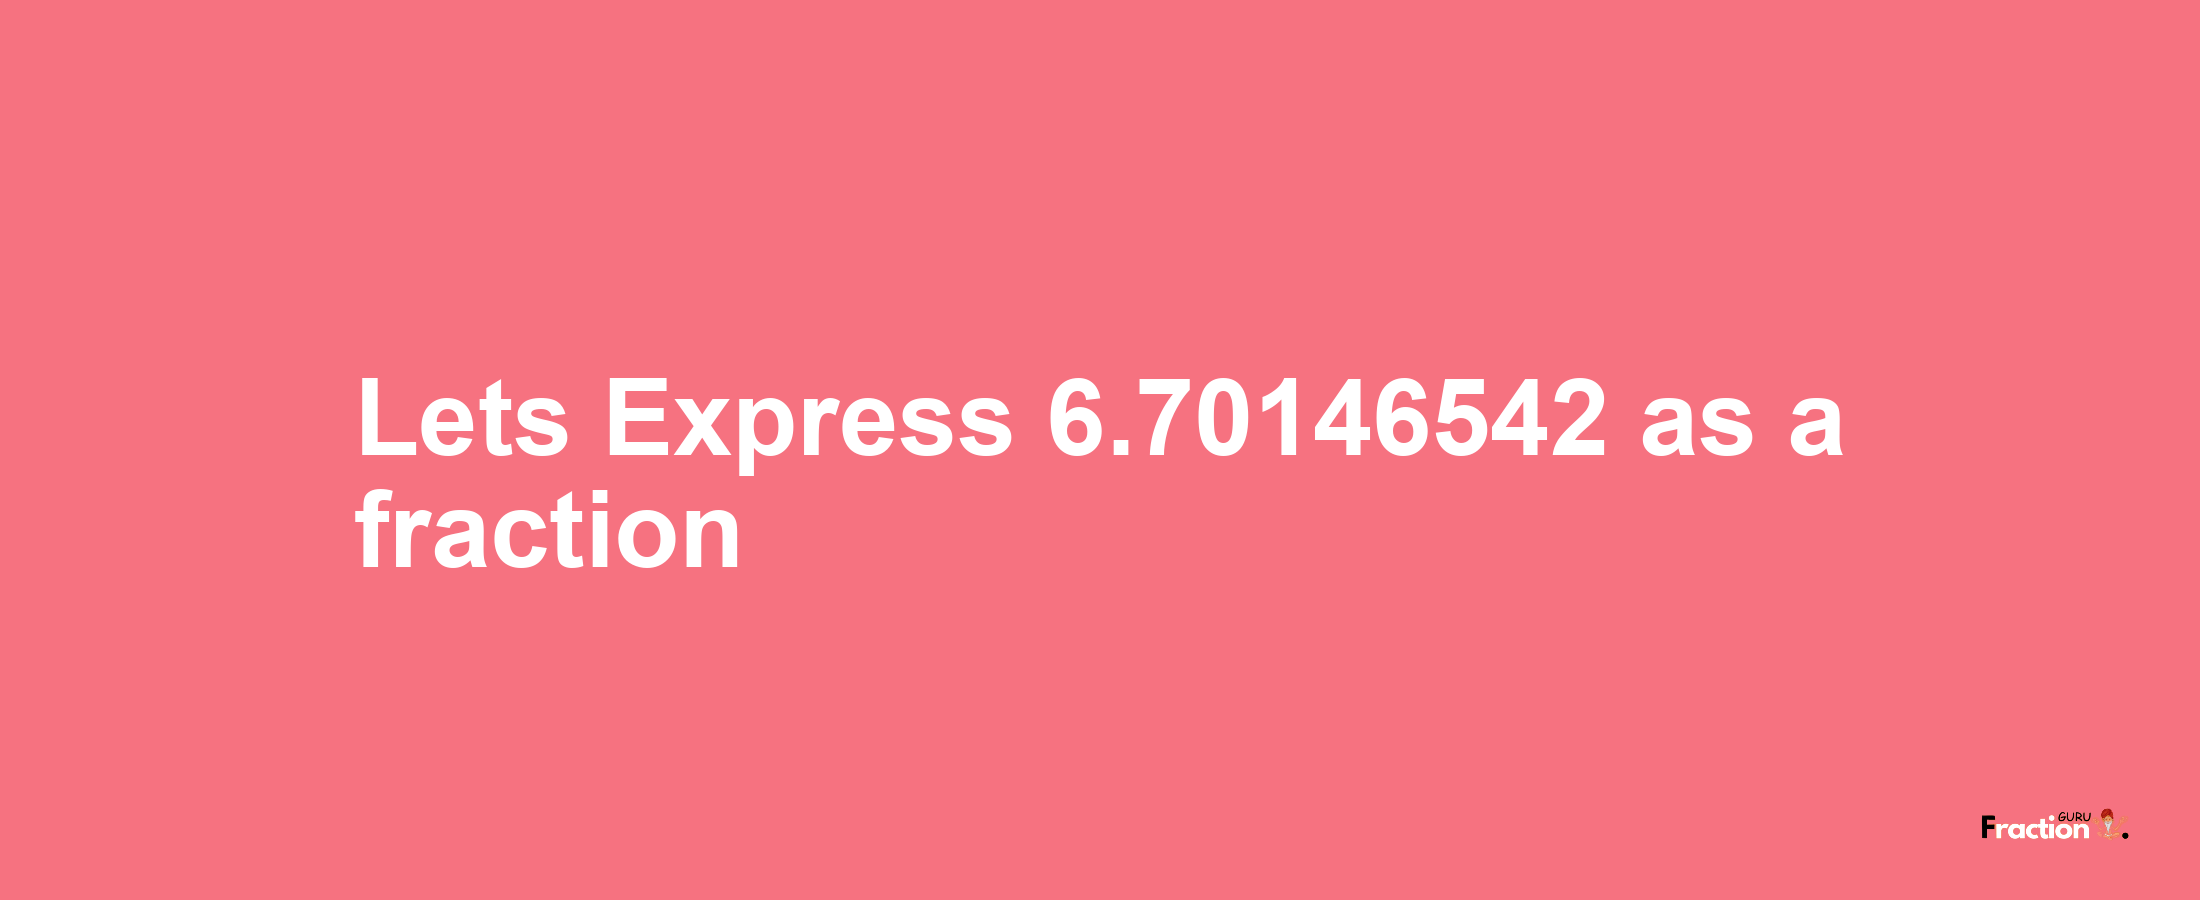 Lets Express 6.70146542 as afraction